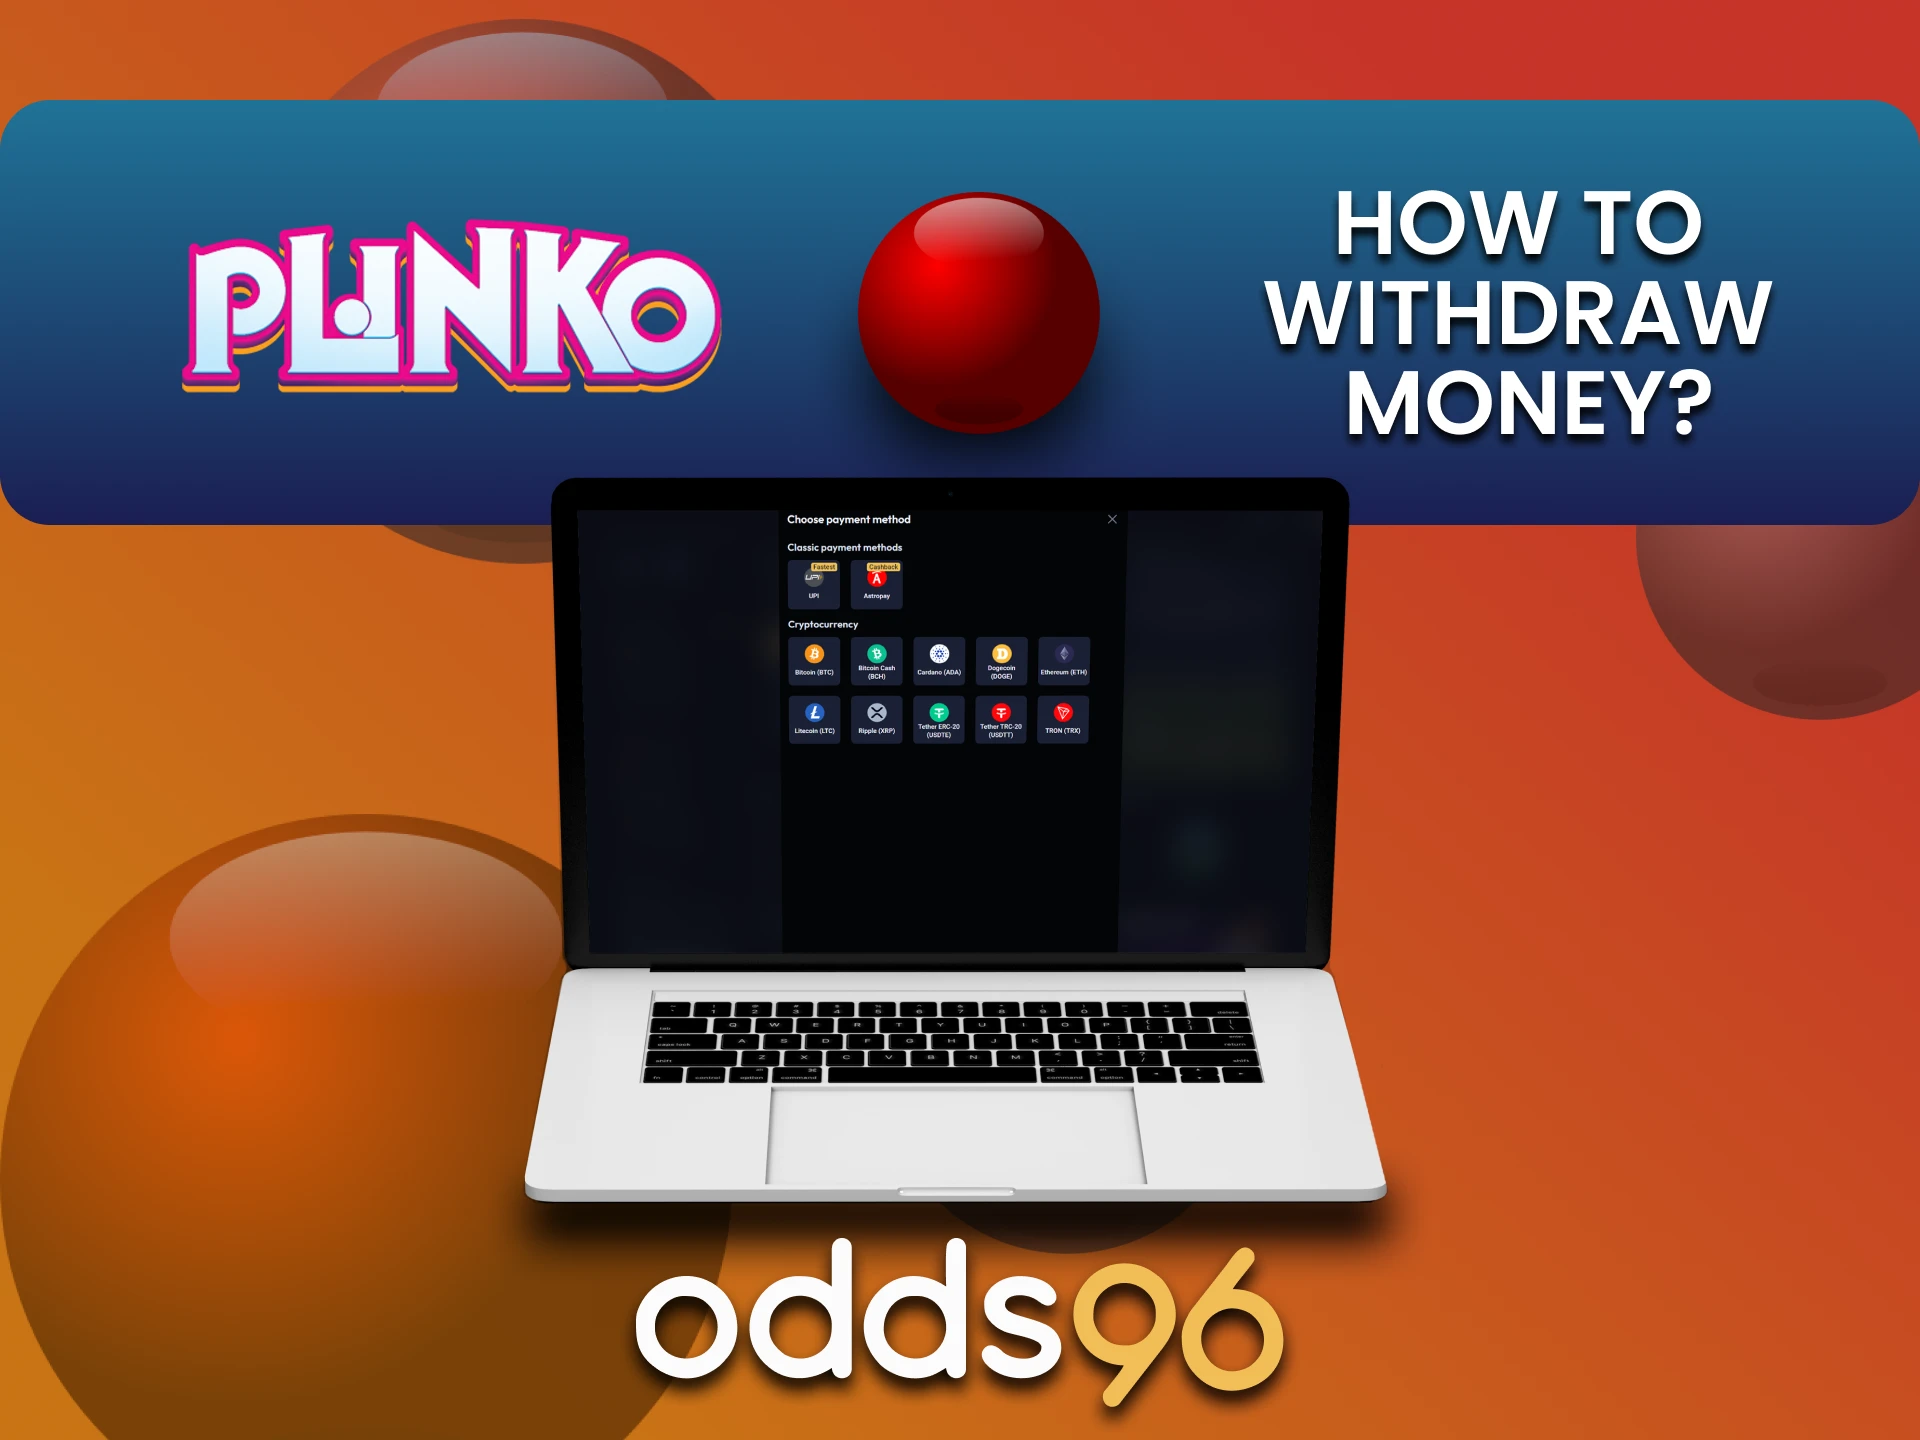 We will tell you about ways to withdraw funds on odds96 for Plinko.